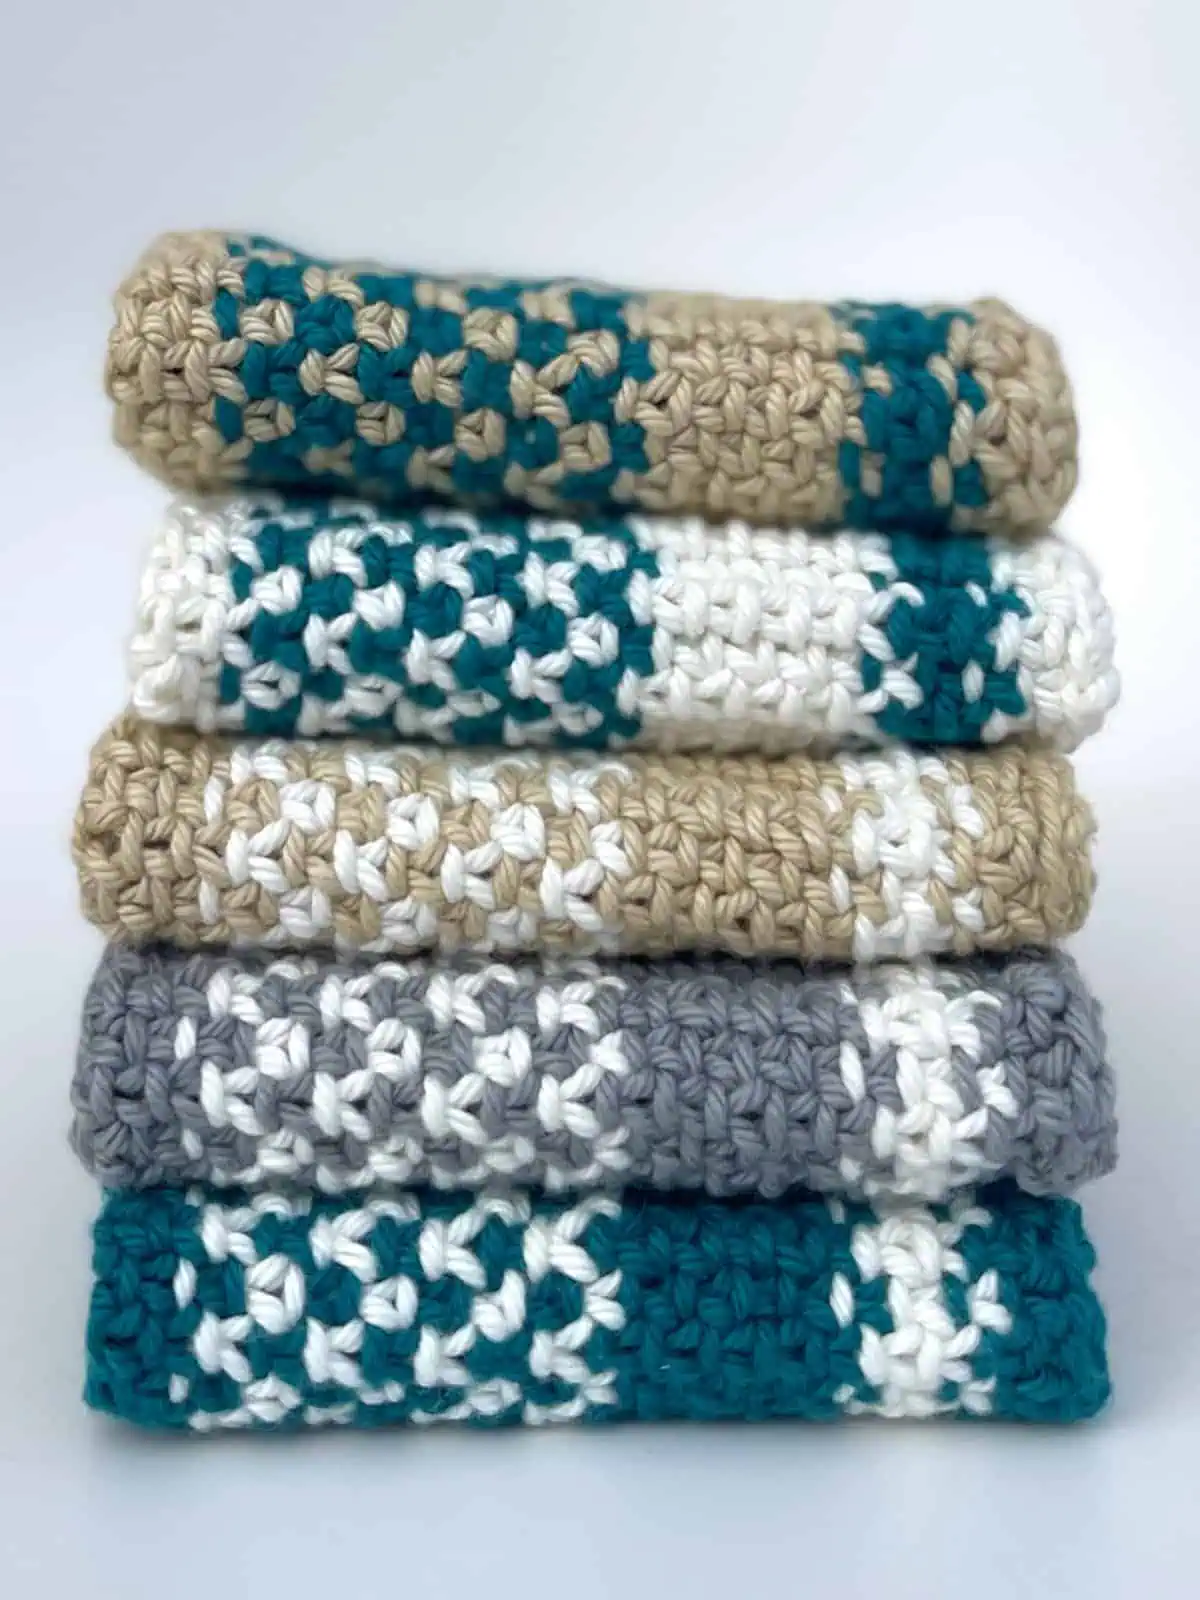 Stack of five knitted dishcloths in the linen stitch with blue, white, grey, and tan yarn colors.